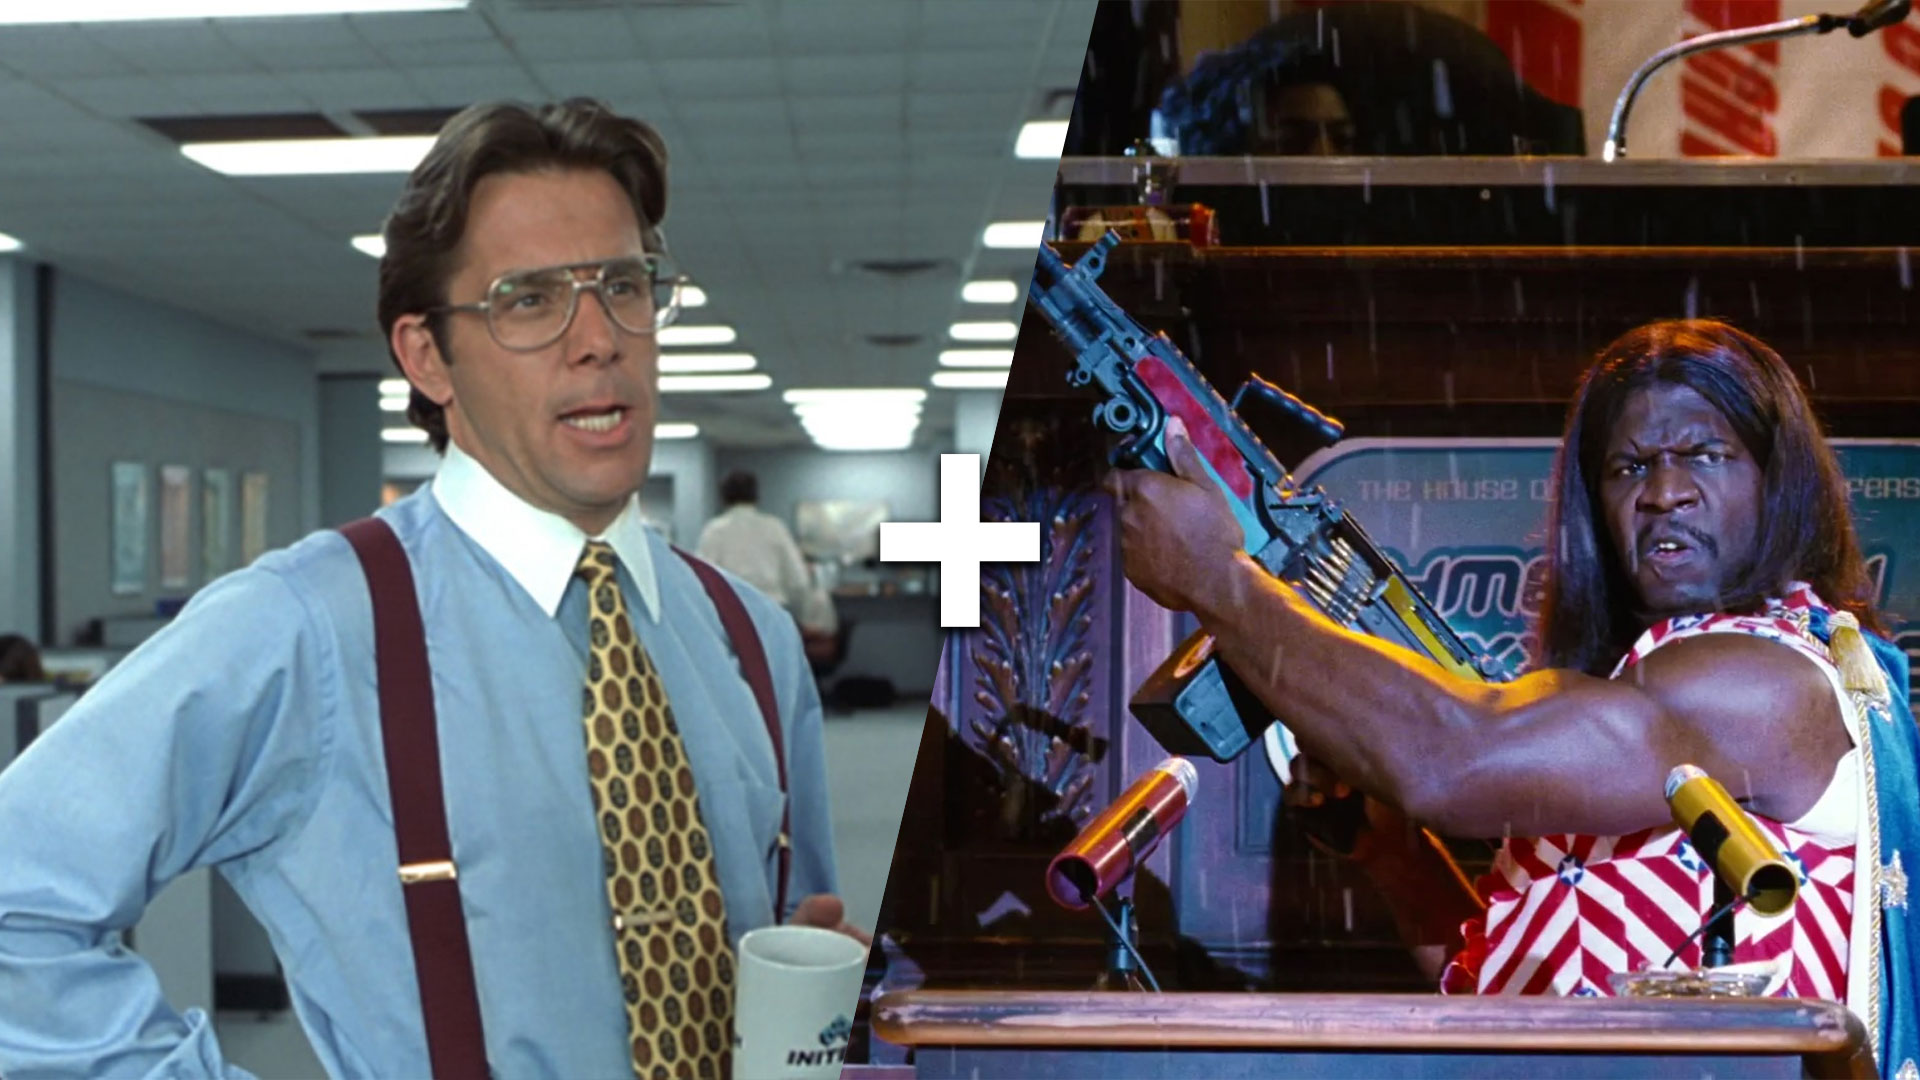 Office Space + Idiocracy